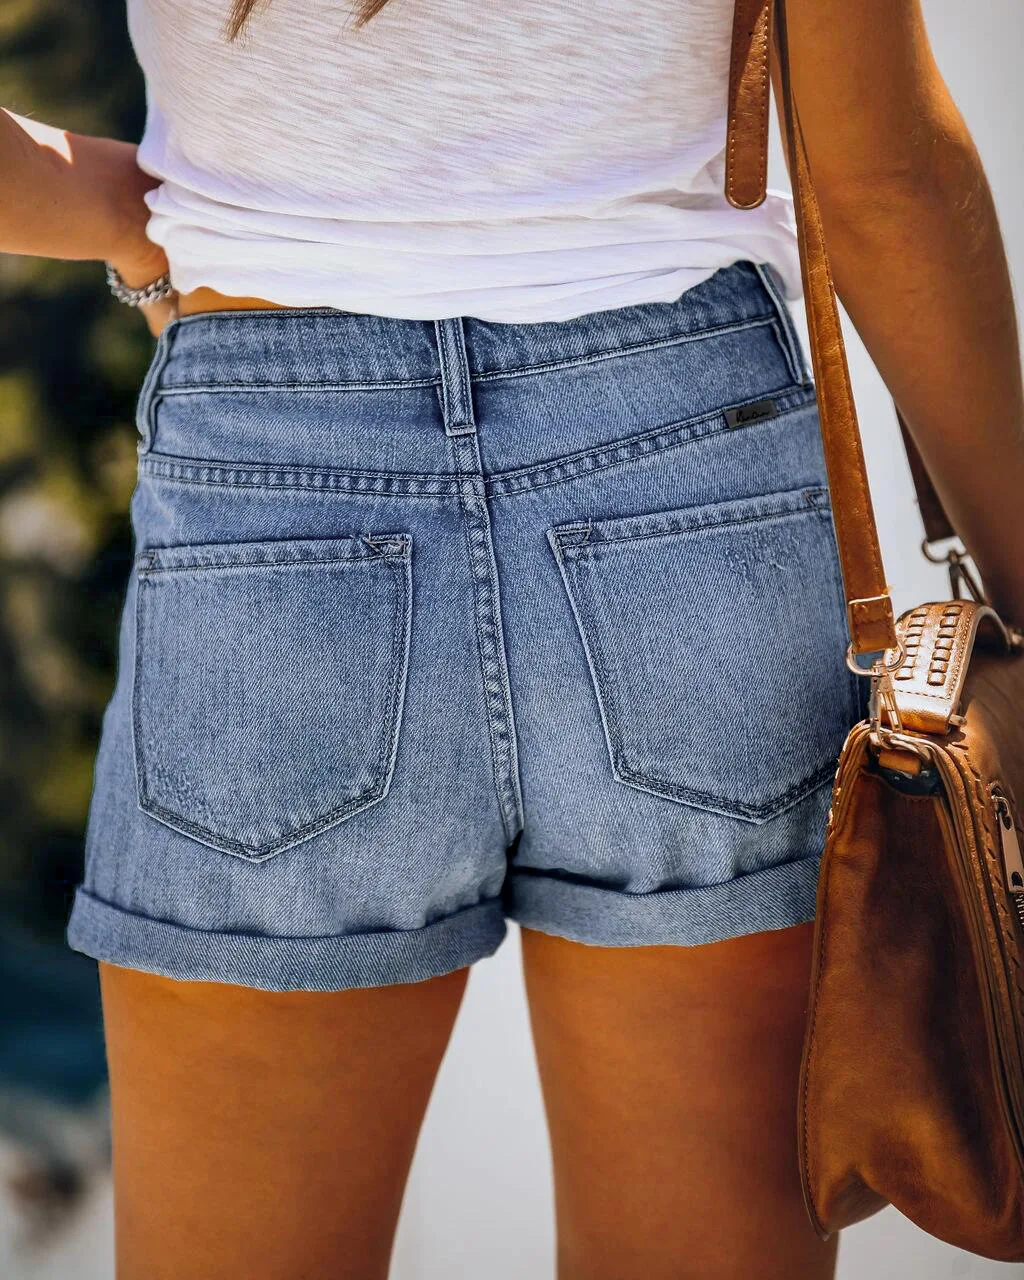 jean shorts women denim shorts for women bale blue ripped washed shorts for summer